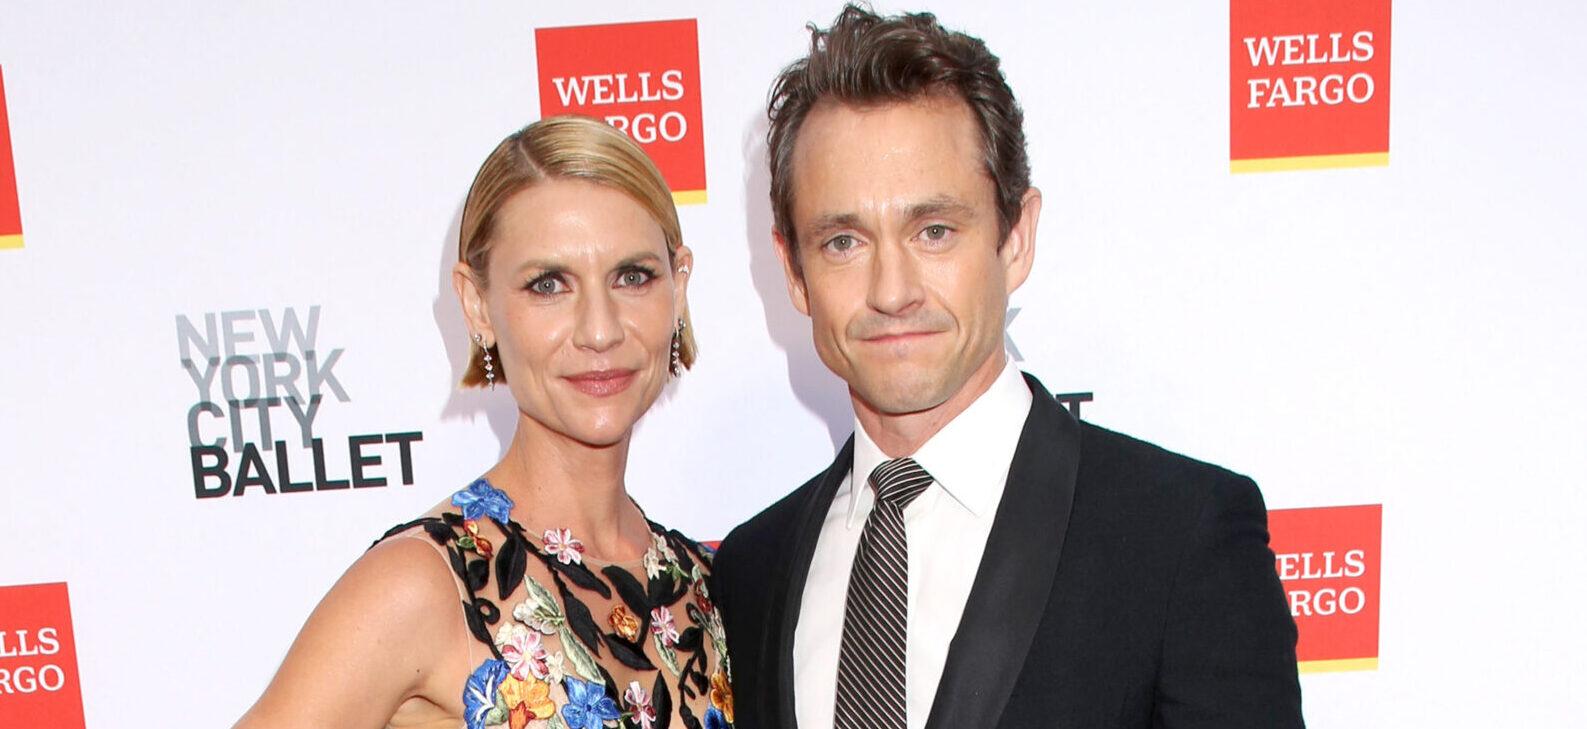 Claire Danes Has Reportedly Given Birth To Her Third Child With Husband Hugh Dancy